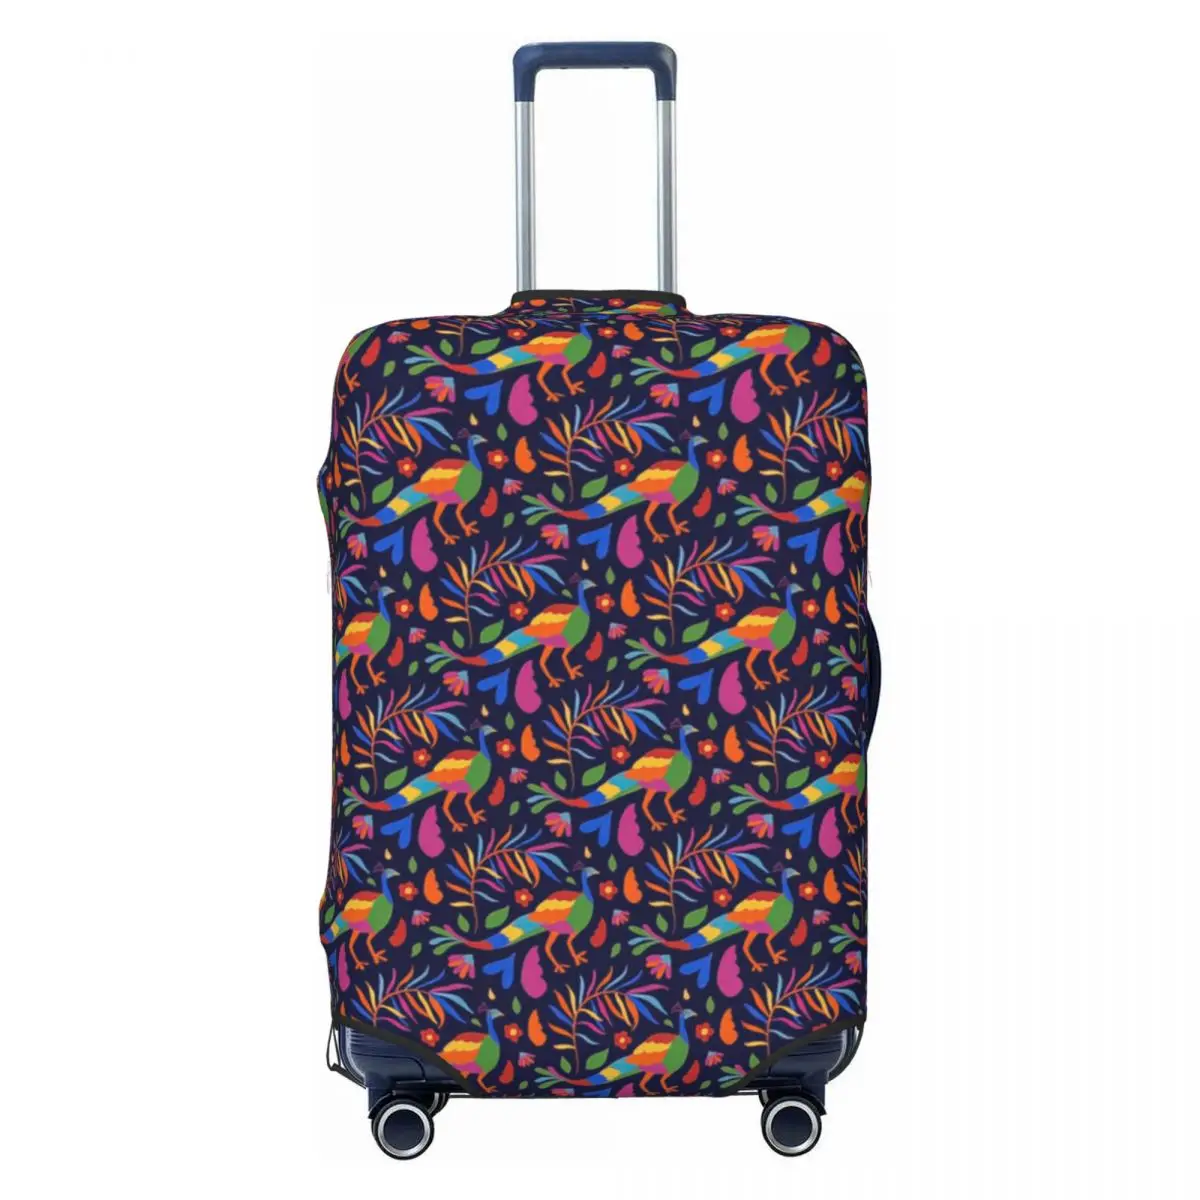 

Mexico Otomi Colourful Peacock Bird Pattern Print Luggage Protective Dust Covers Elastic Waterproof 18-32inch Suitcase Cover